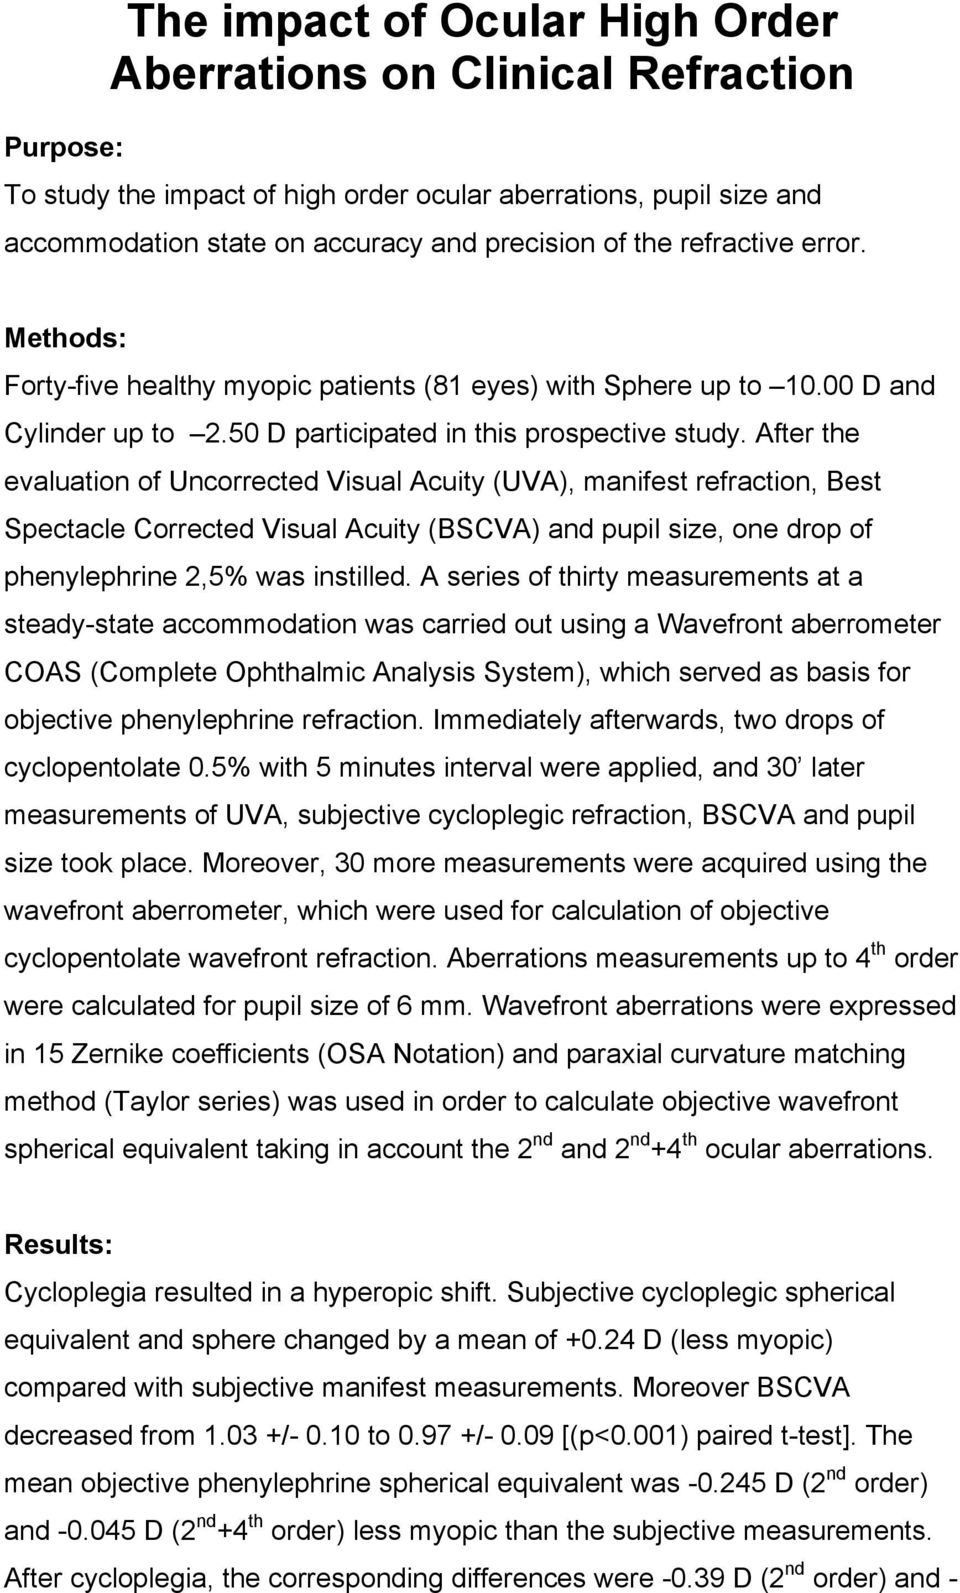 After the evaluation of Uncorrected Visual Acuity (UVA), manifest refraction, Best Spectacle Corrected Visual Acuity (BSCVA) and pupil size, one drop of phenylephrine 2,5% was instilled.